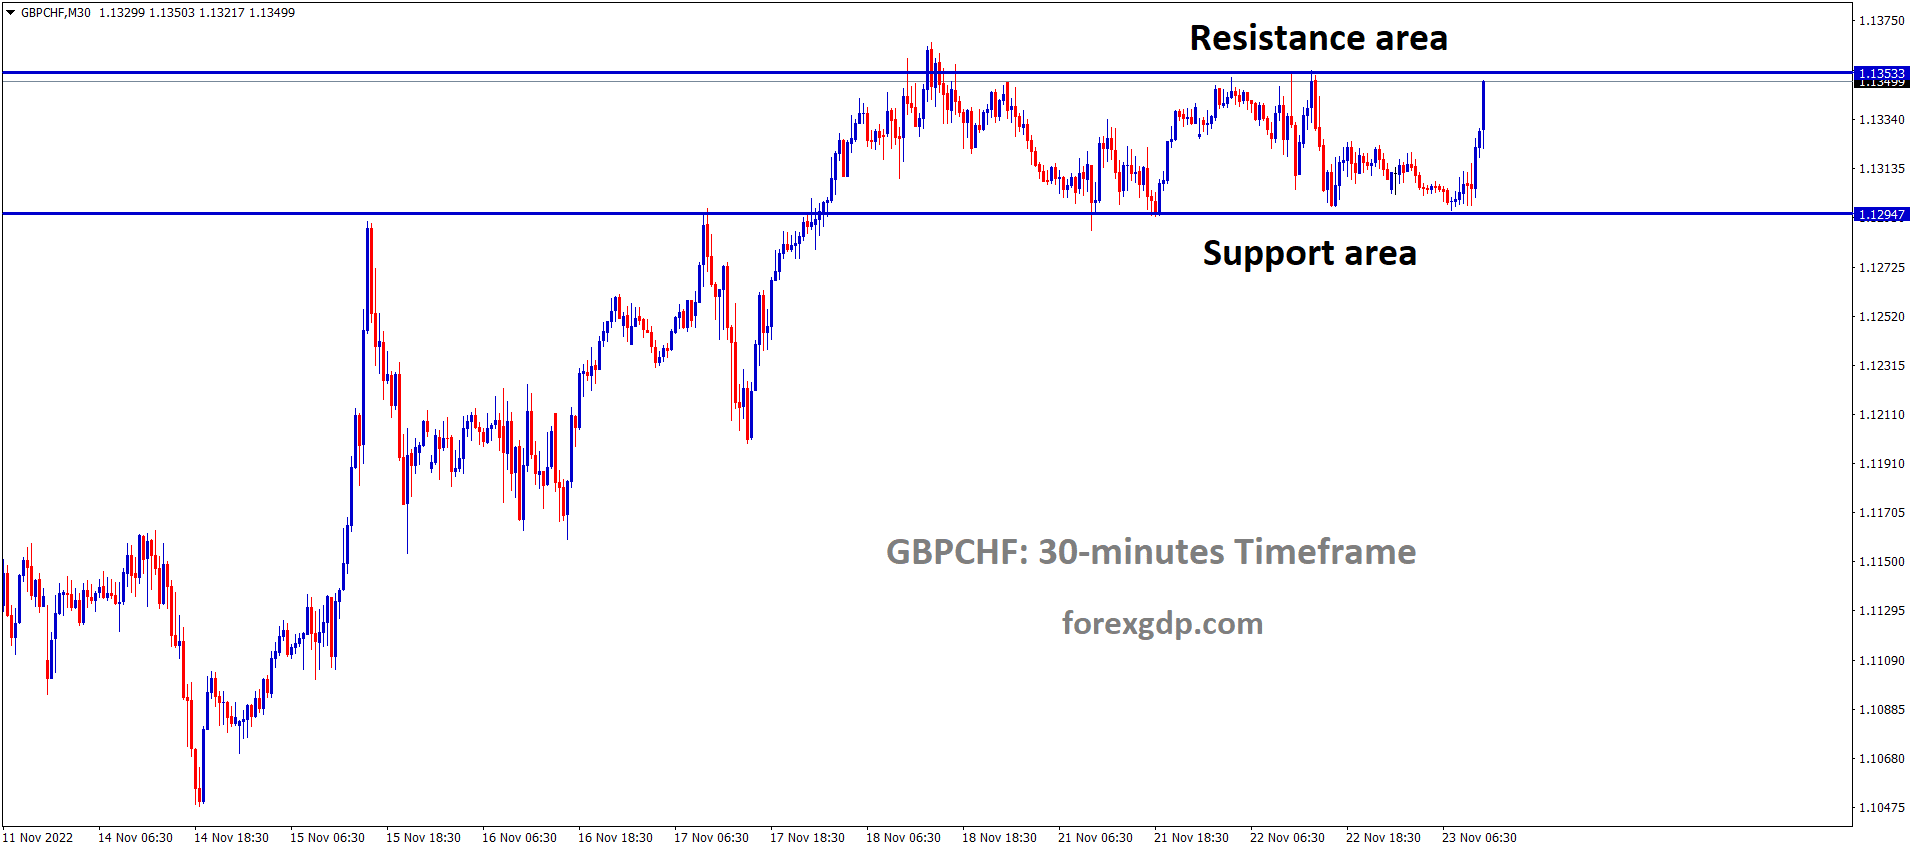 GBPCHF is moving in the Box pattern and the market has reached the resistance area of the pattern